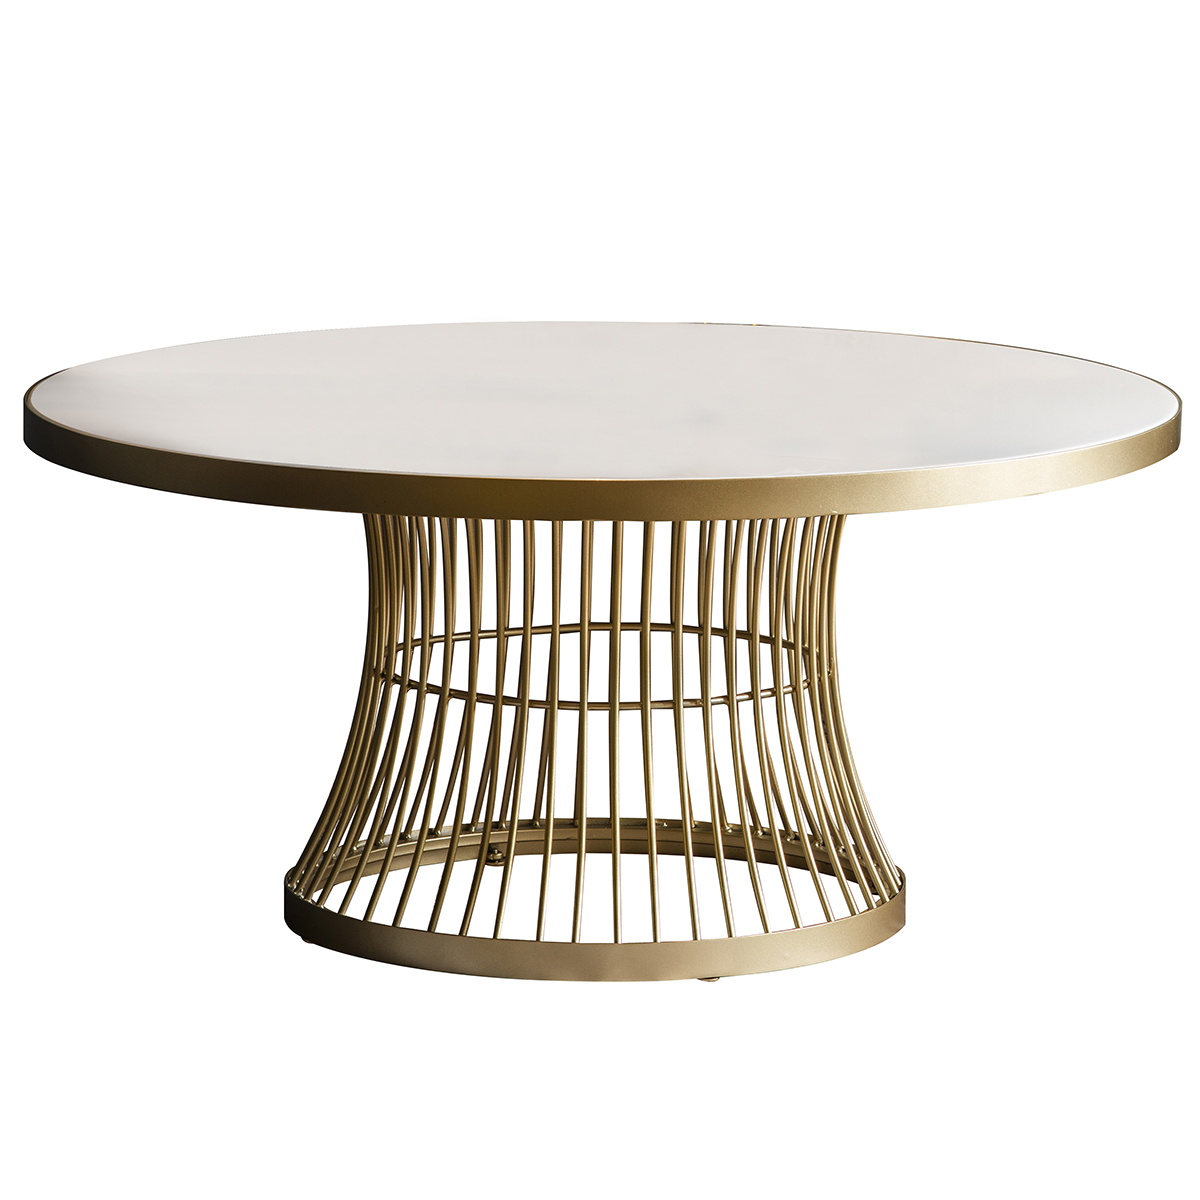 Gallery Direct Pickford Coffee Table Champagne